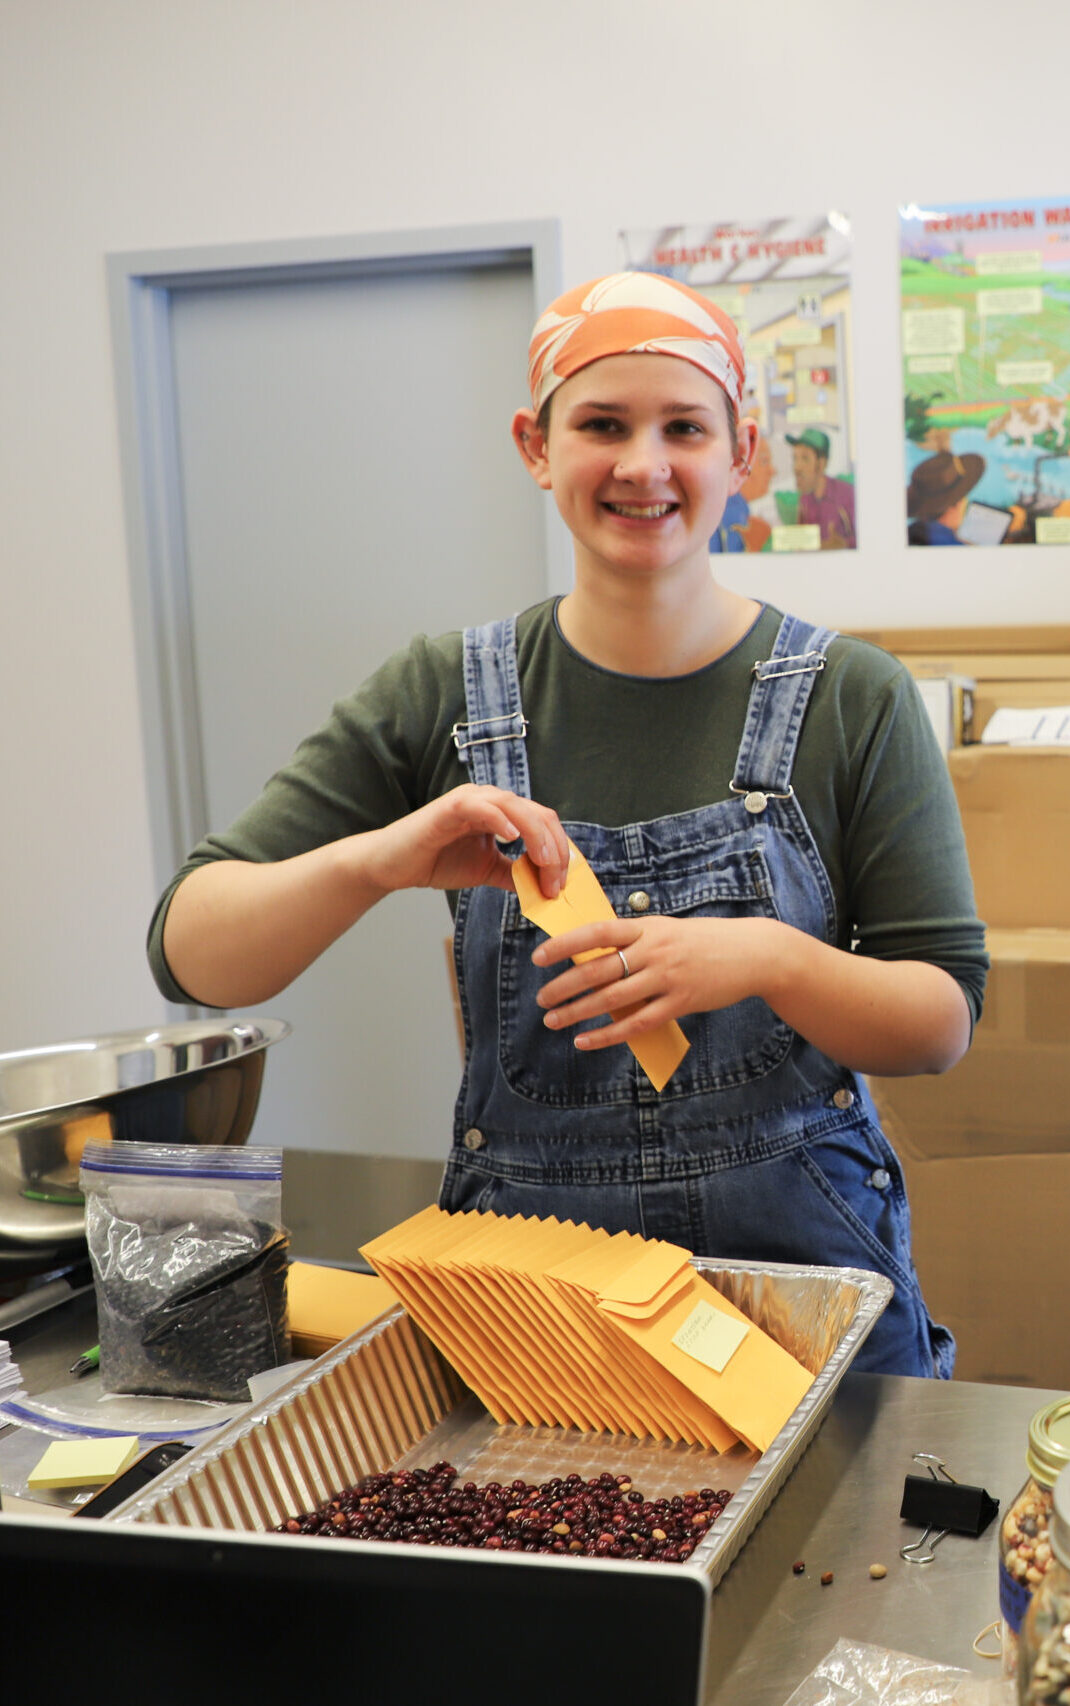 Person wearing overalls smiles as they put small round seeds into envelopes.